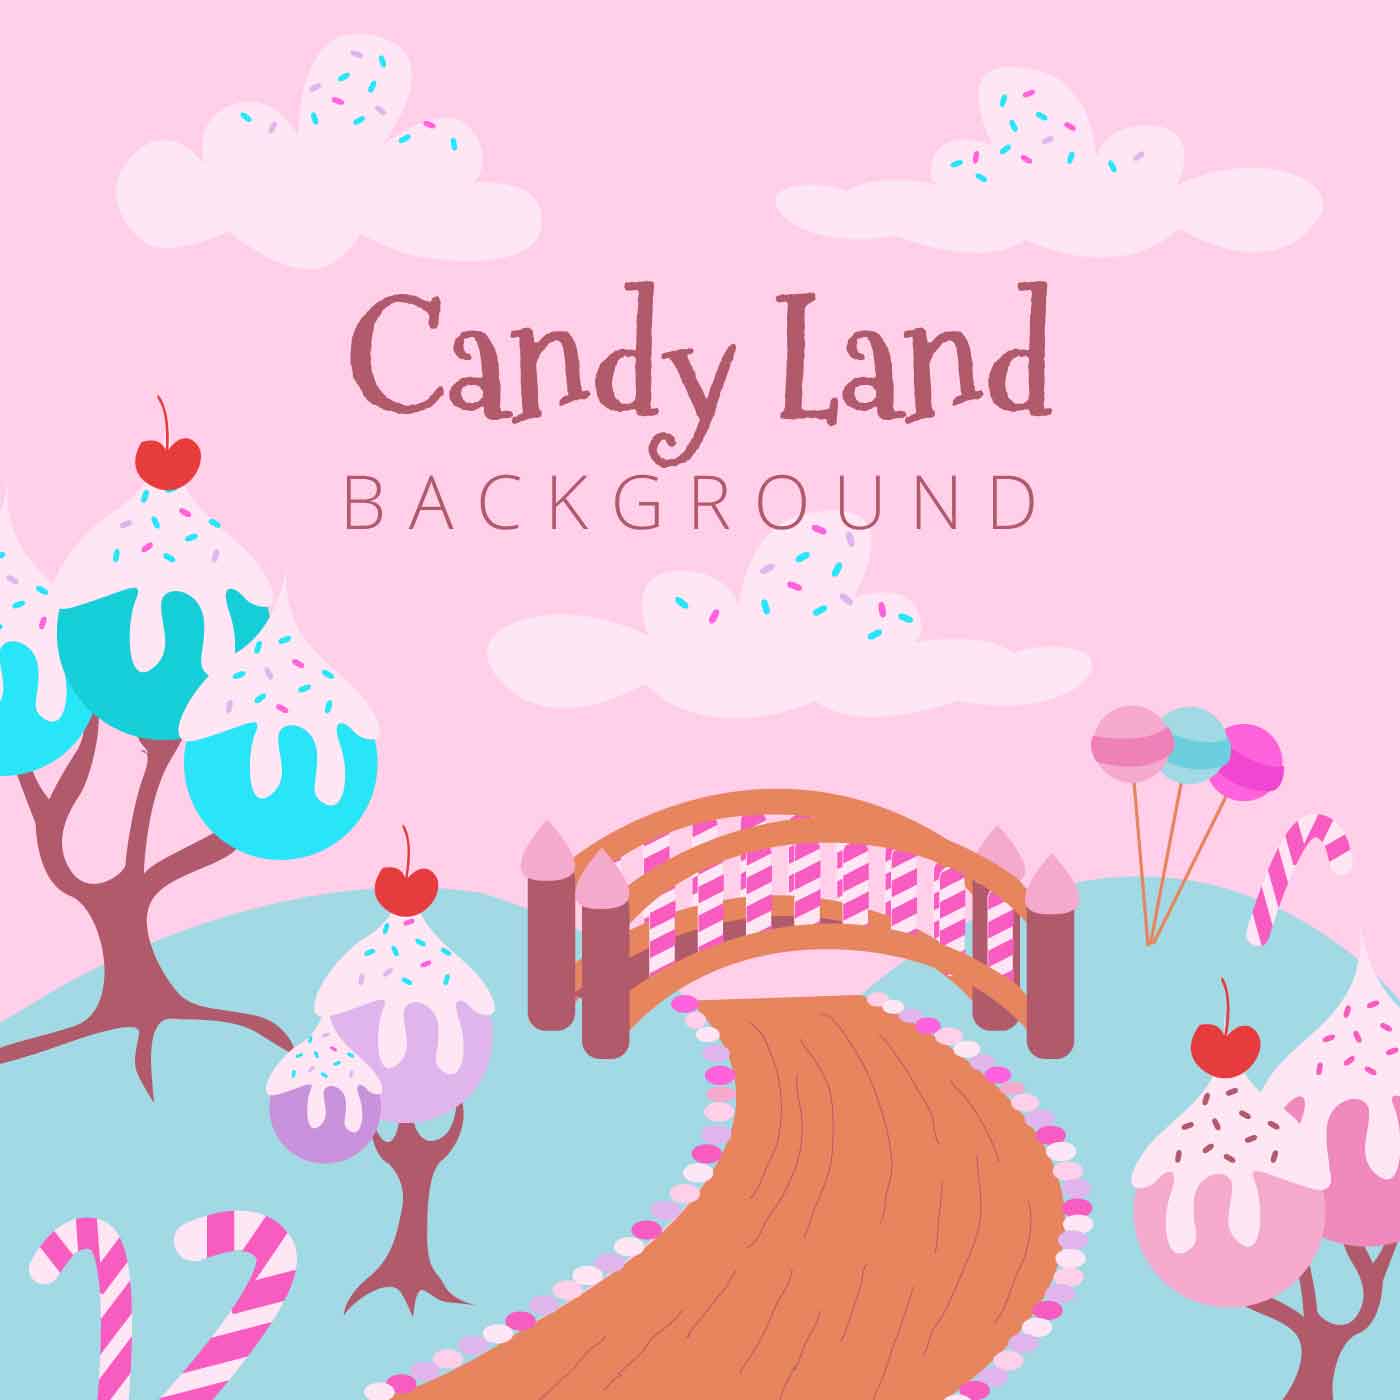 Sweet Candy Land Background Free Vector Art, Stock